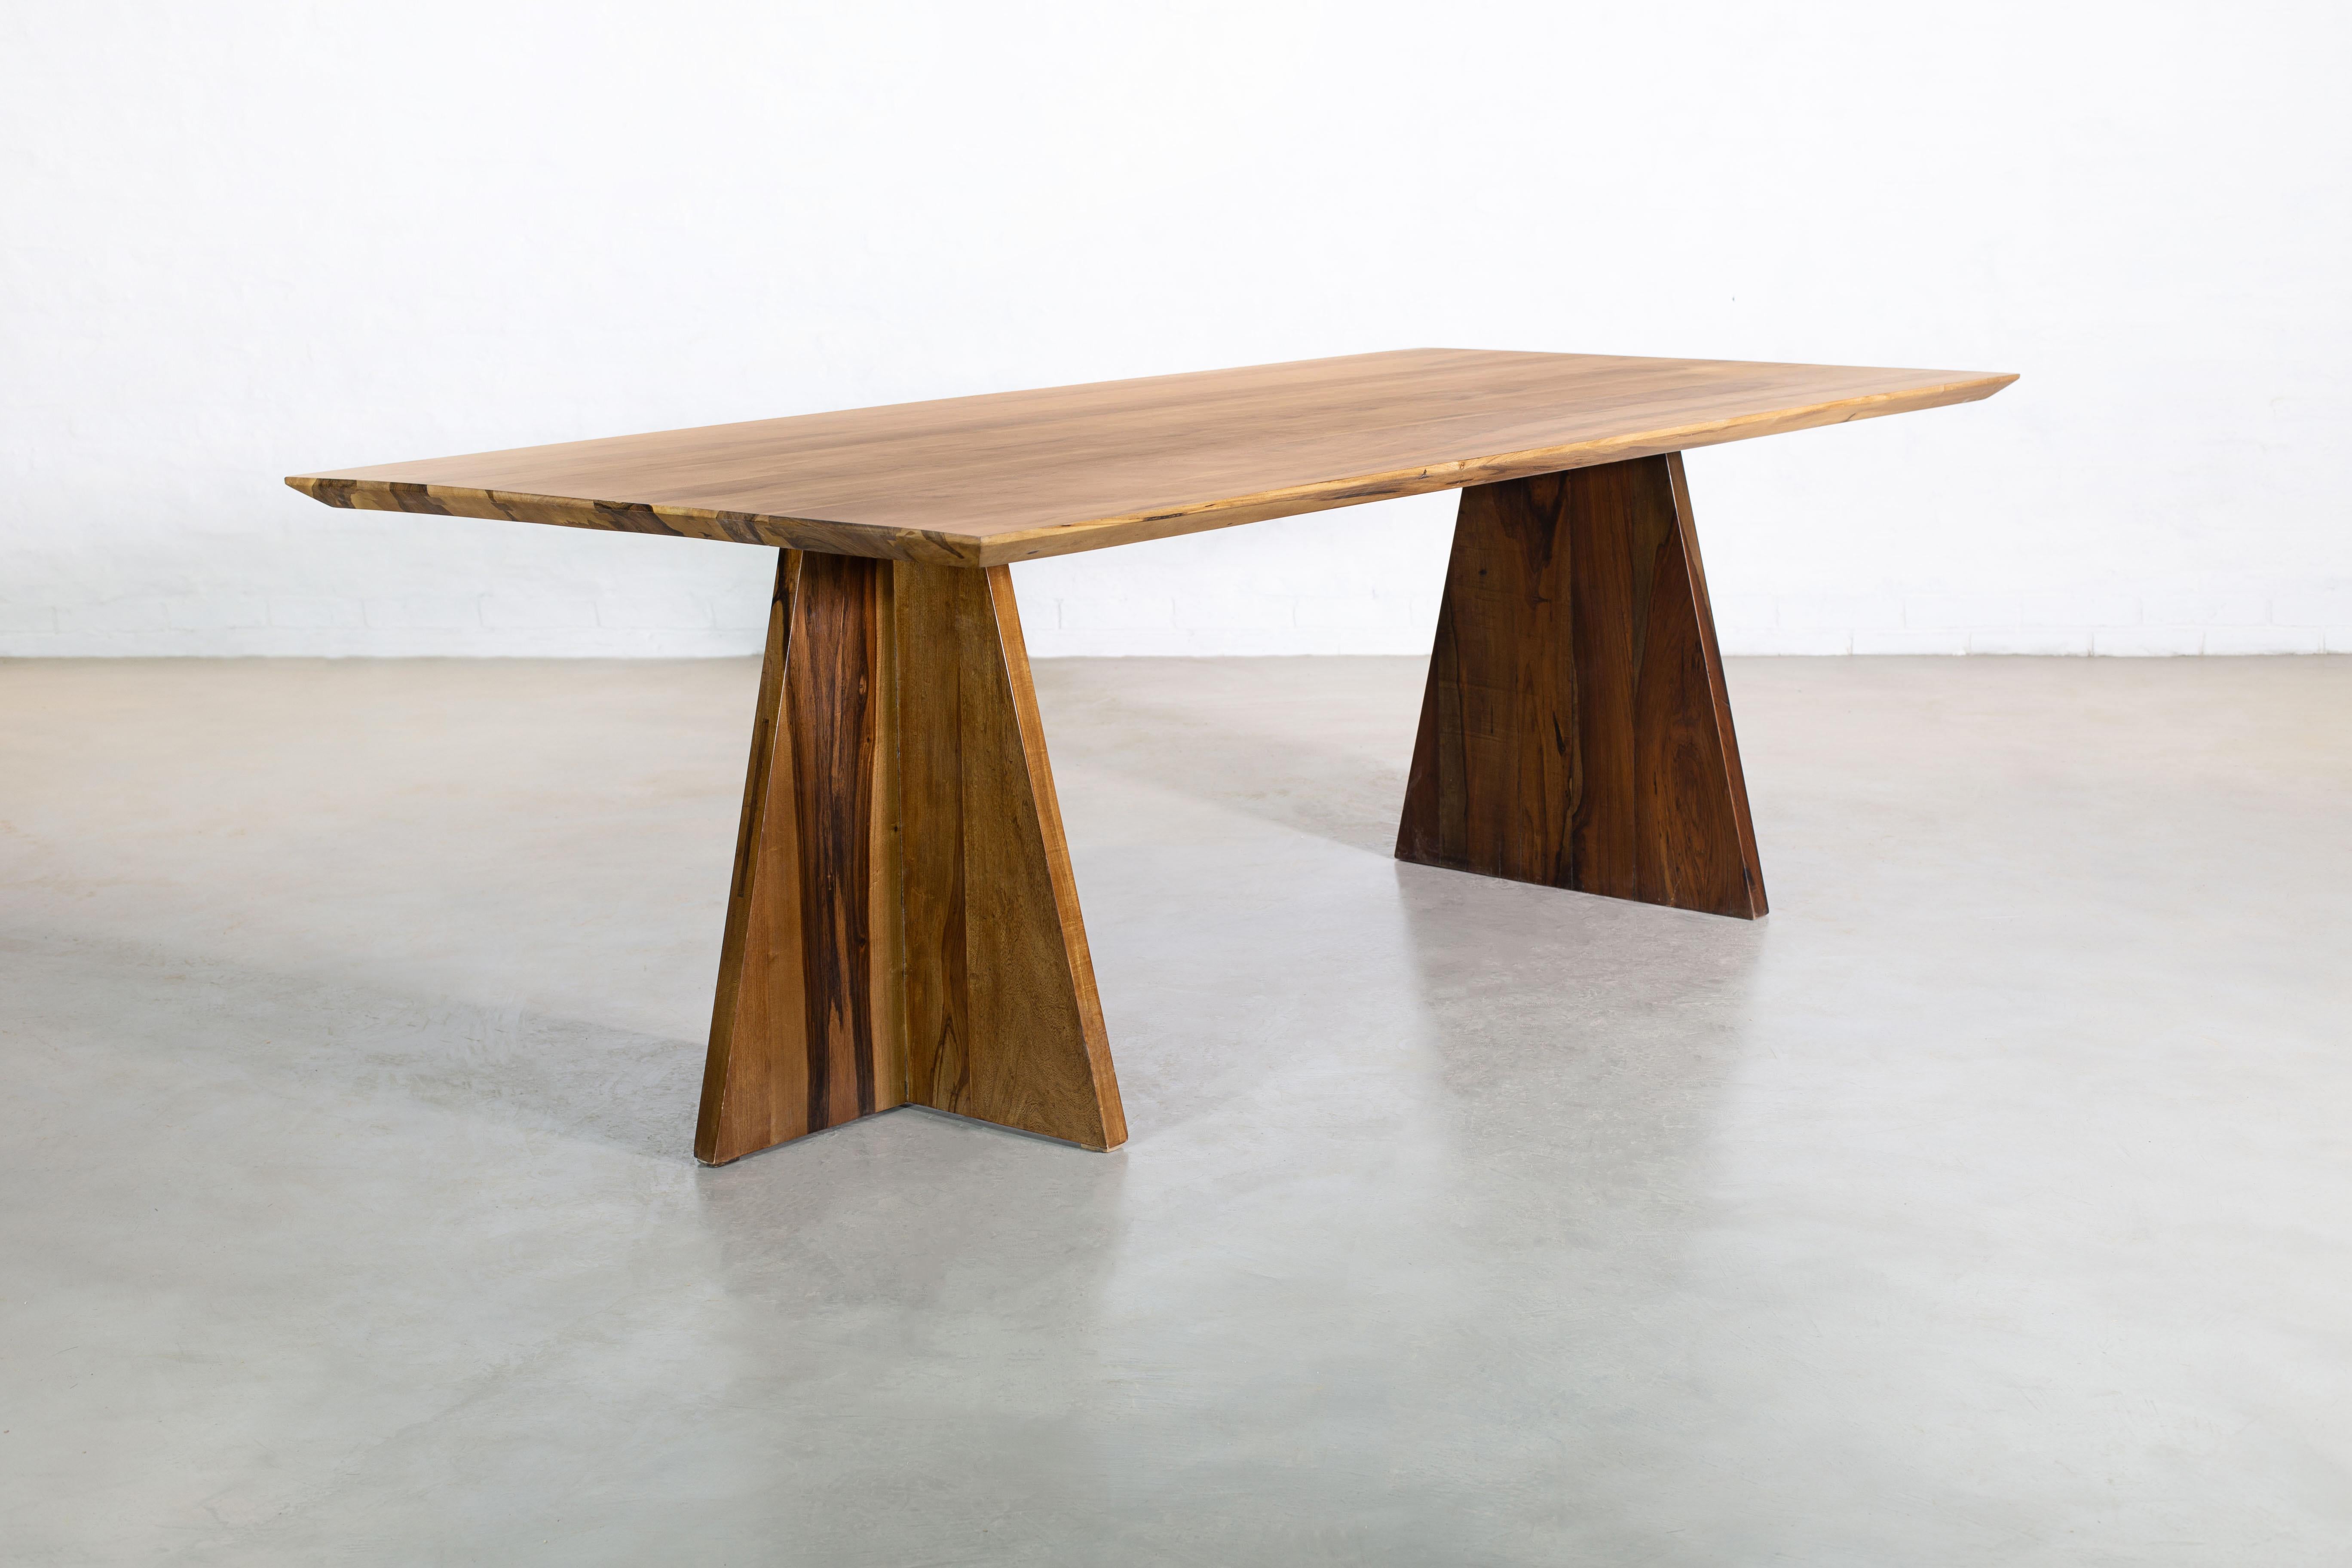 Luca Solid Exotic Argentine Rosewood Twin Pedestal Dining Table or Desk Costantini 

In Stock in New York 

The Luca table is one of Costantini’s signature and most specified pieces. It is shown here with a knife edge in Argentine Rosewood, a highly